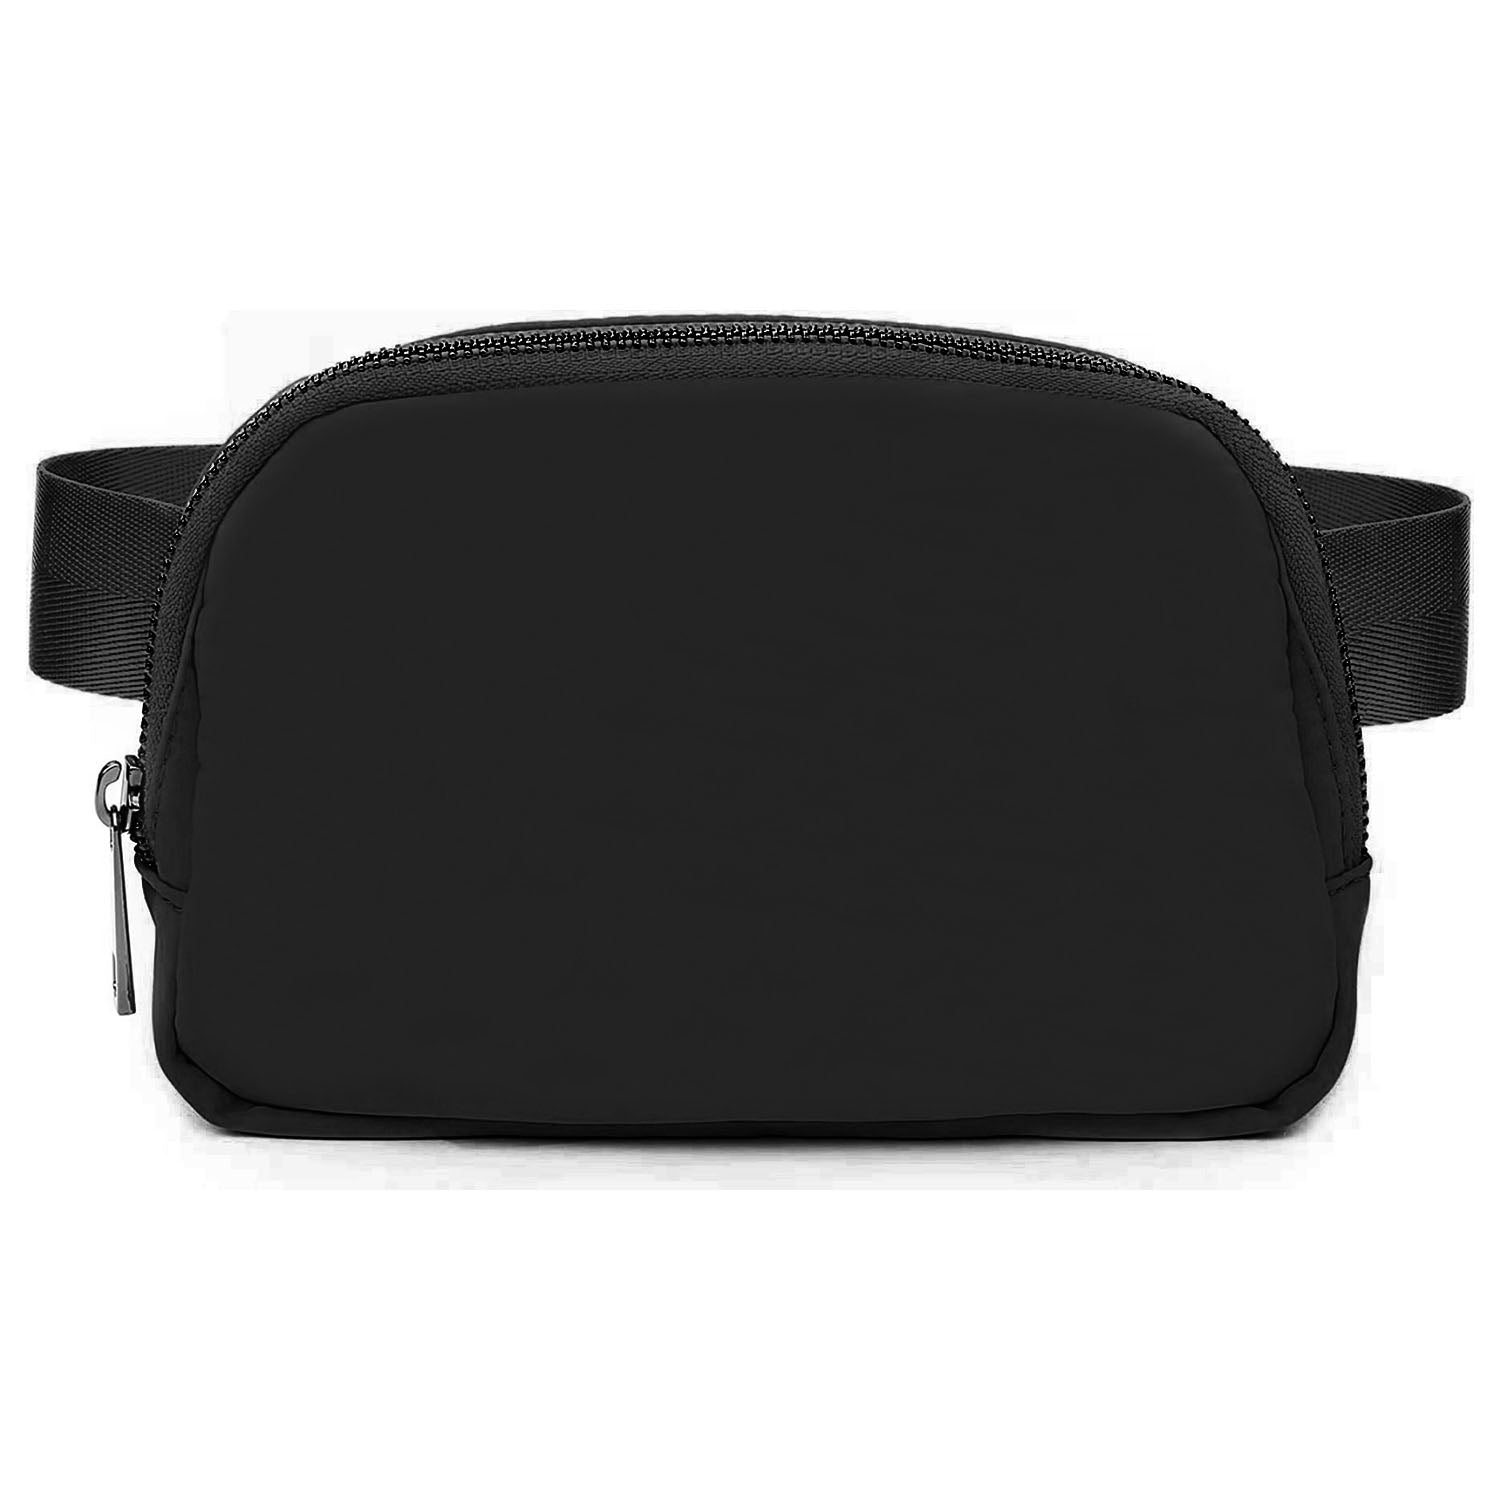 title:Sport Fanny Pack Unisex Waist Pouch Belt Bag Purse Chest Bag for Outdoor Sport Travel Beach Concerts Travel 20.86in-35.03in Waist Circumference with A;color:Black